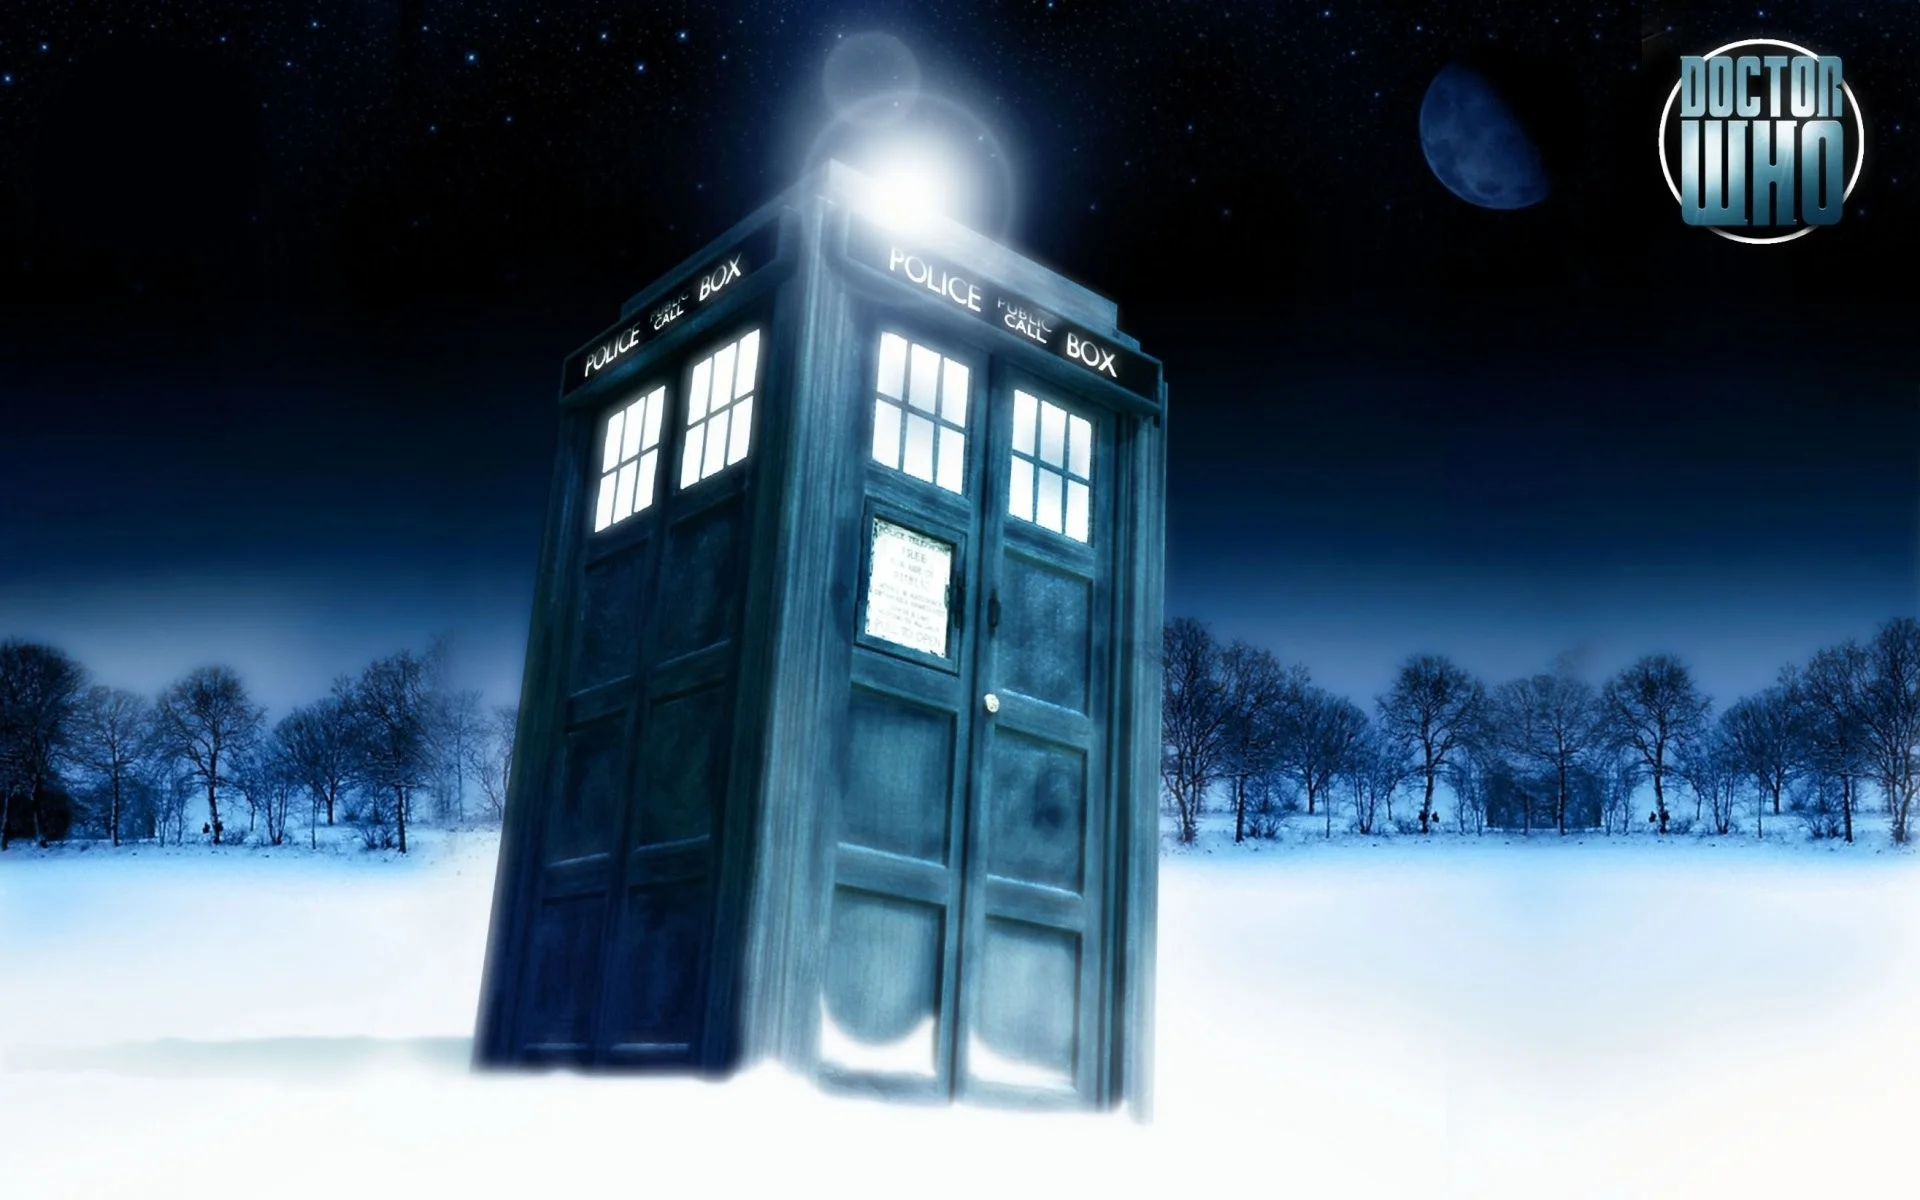 Doctor Who TARDIS Wallpapers HD Desktop and Mobile Backgrounds